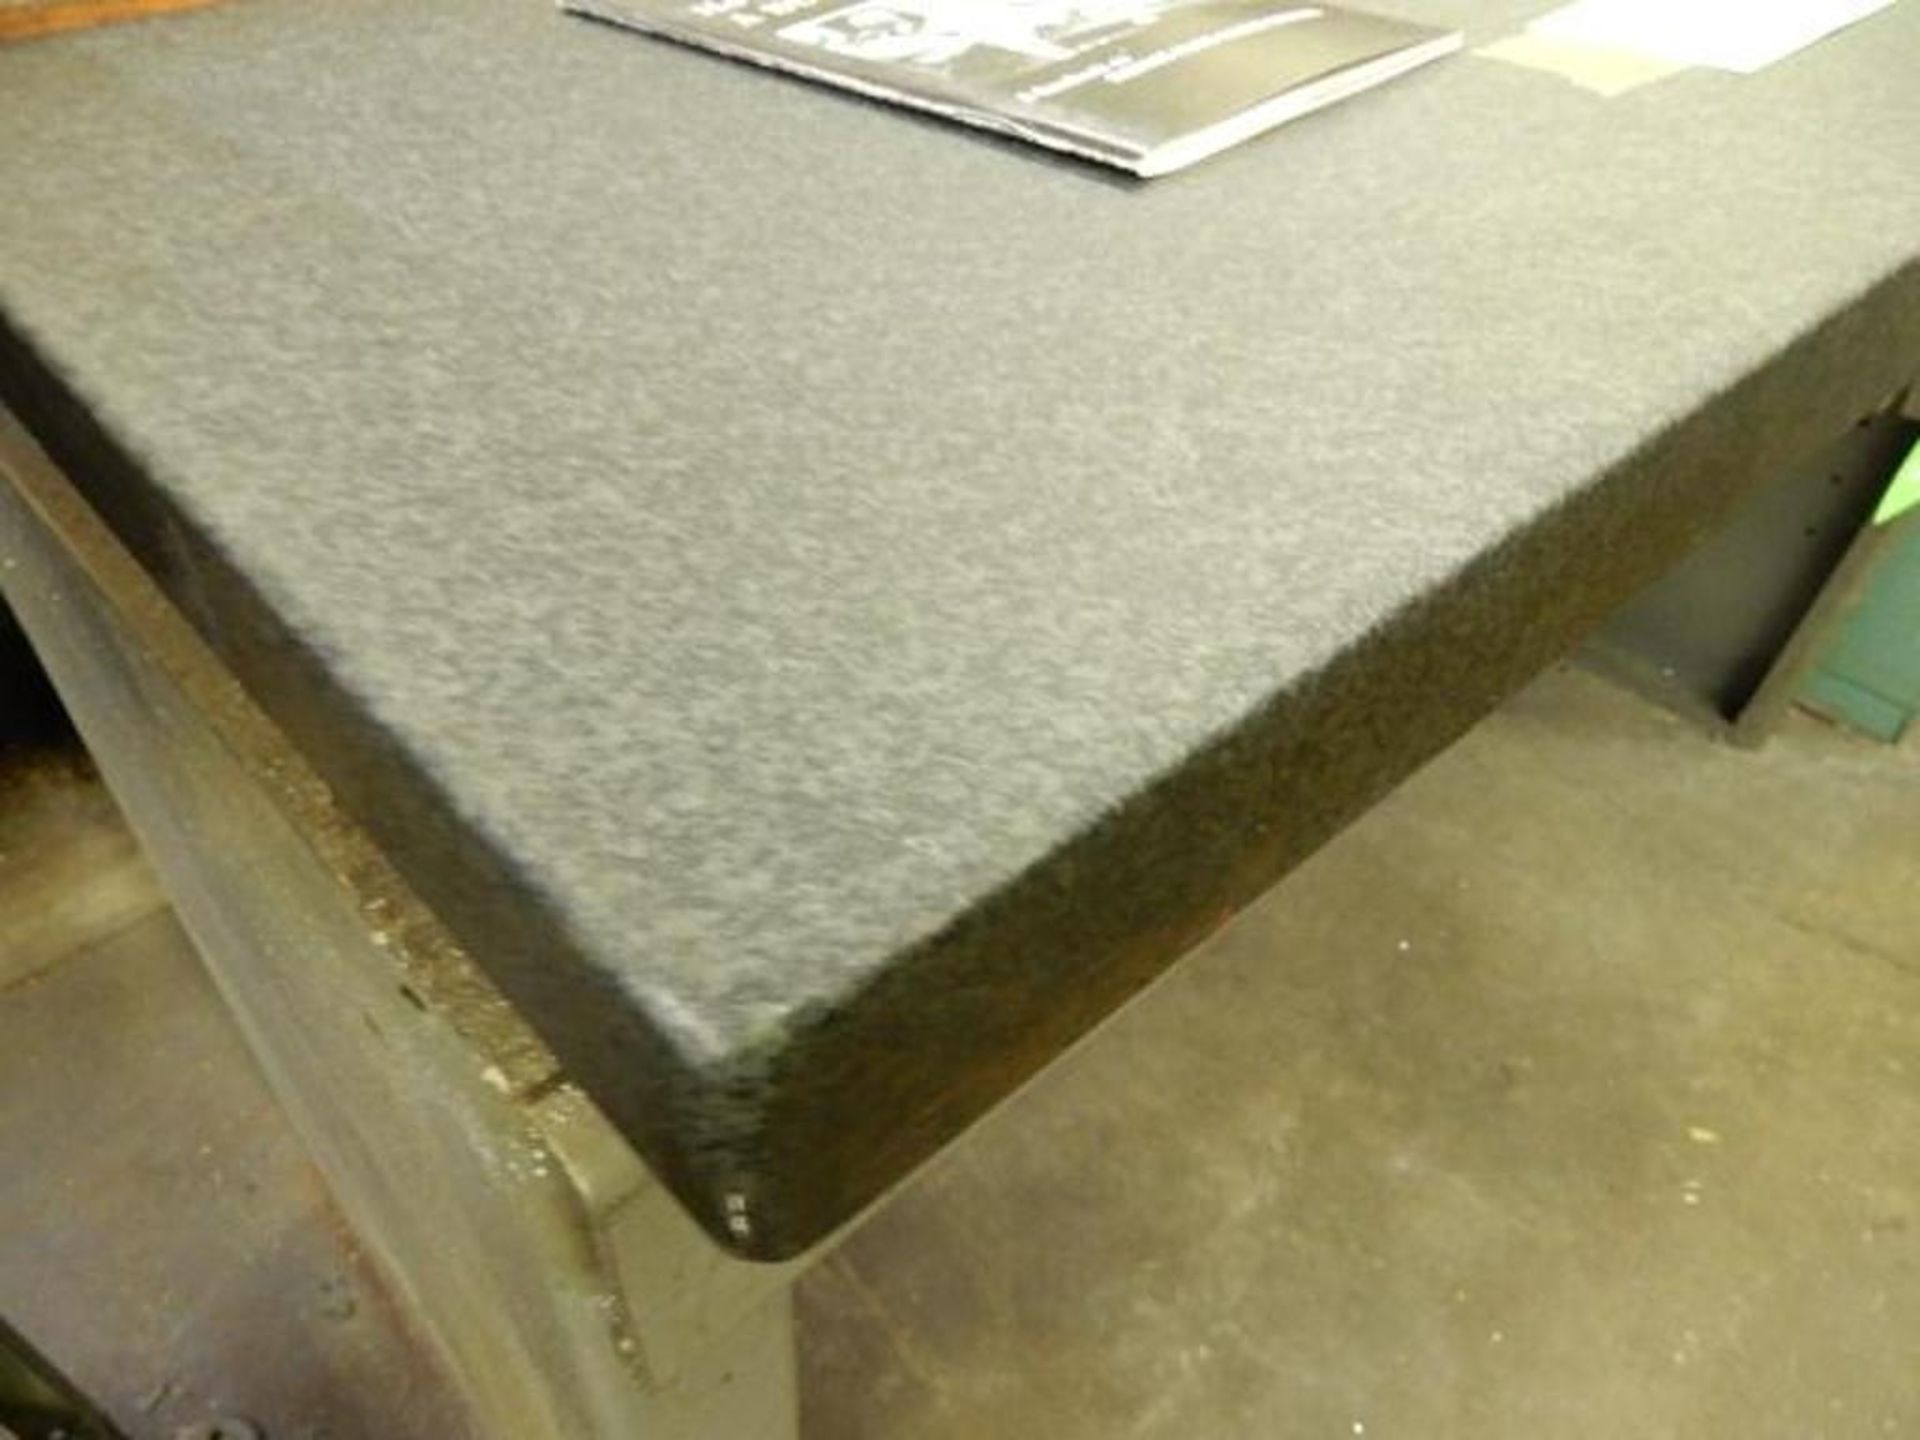 24" x 18" x 4" Double Ledge Granite Surface Plate - Image 2 of 3